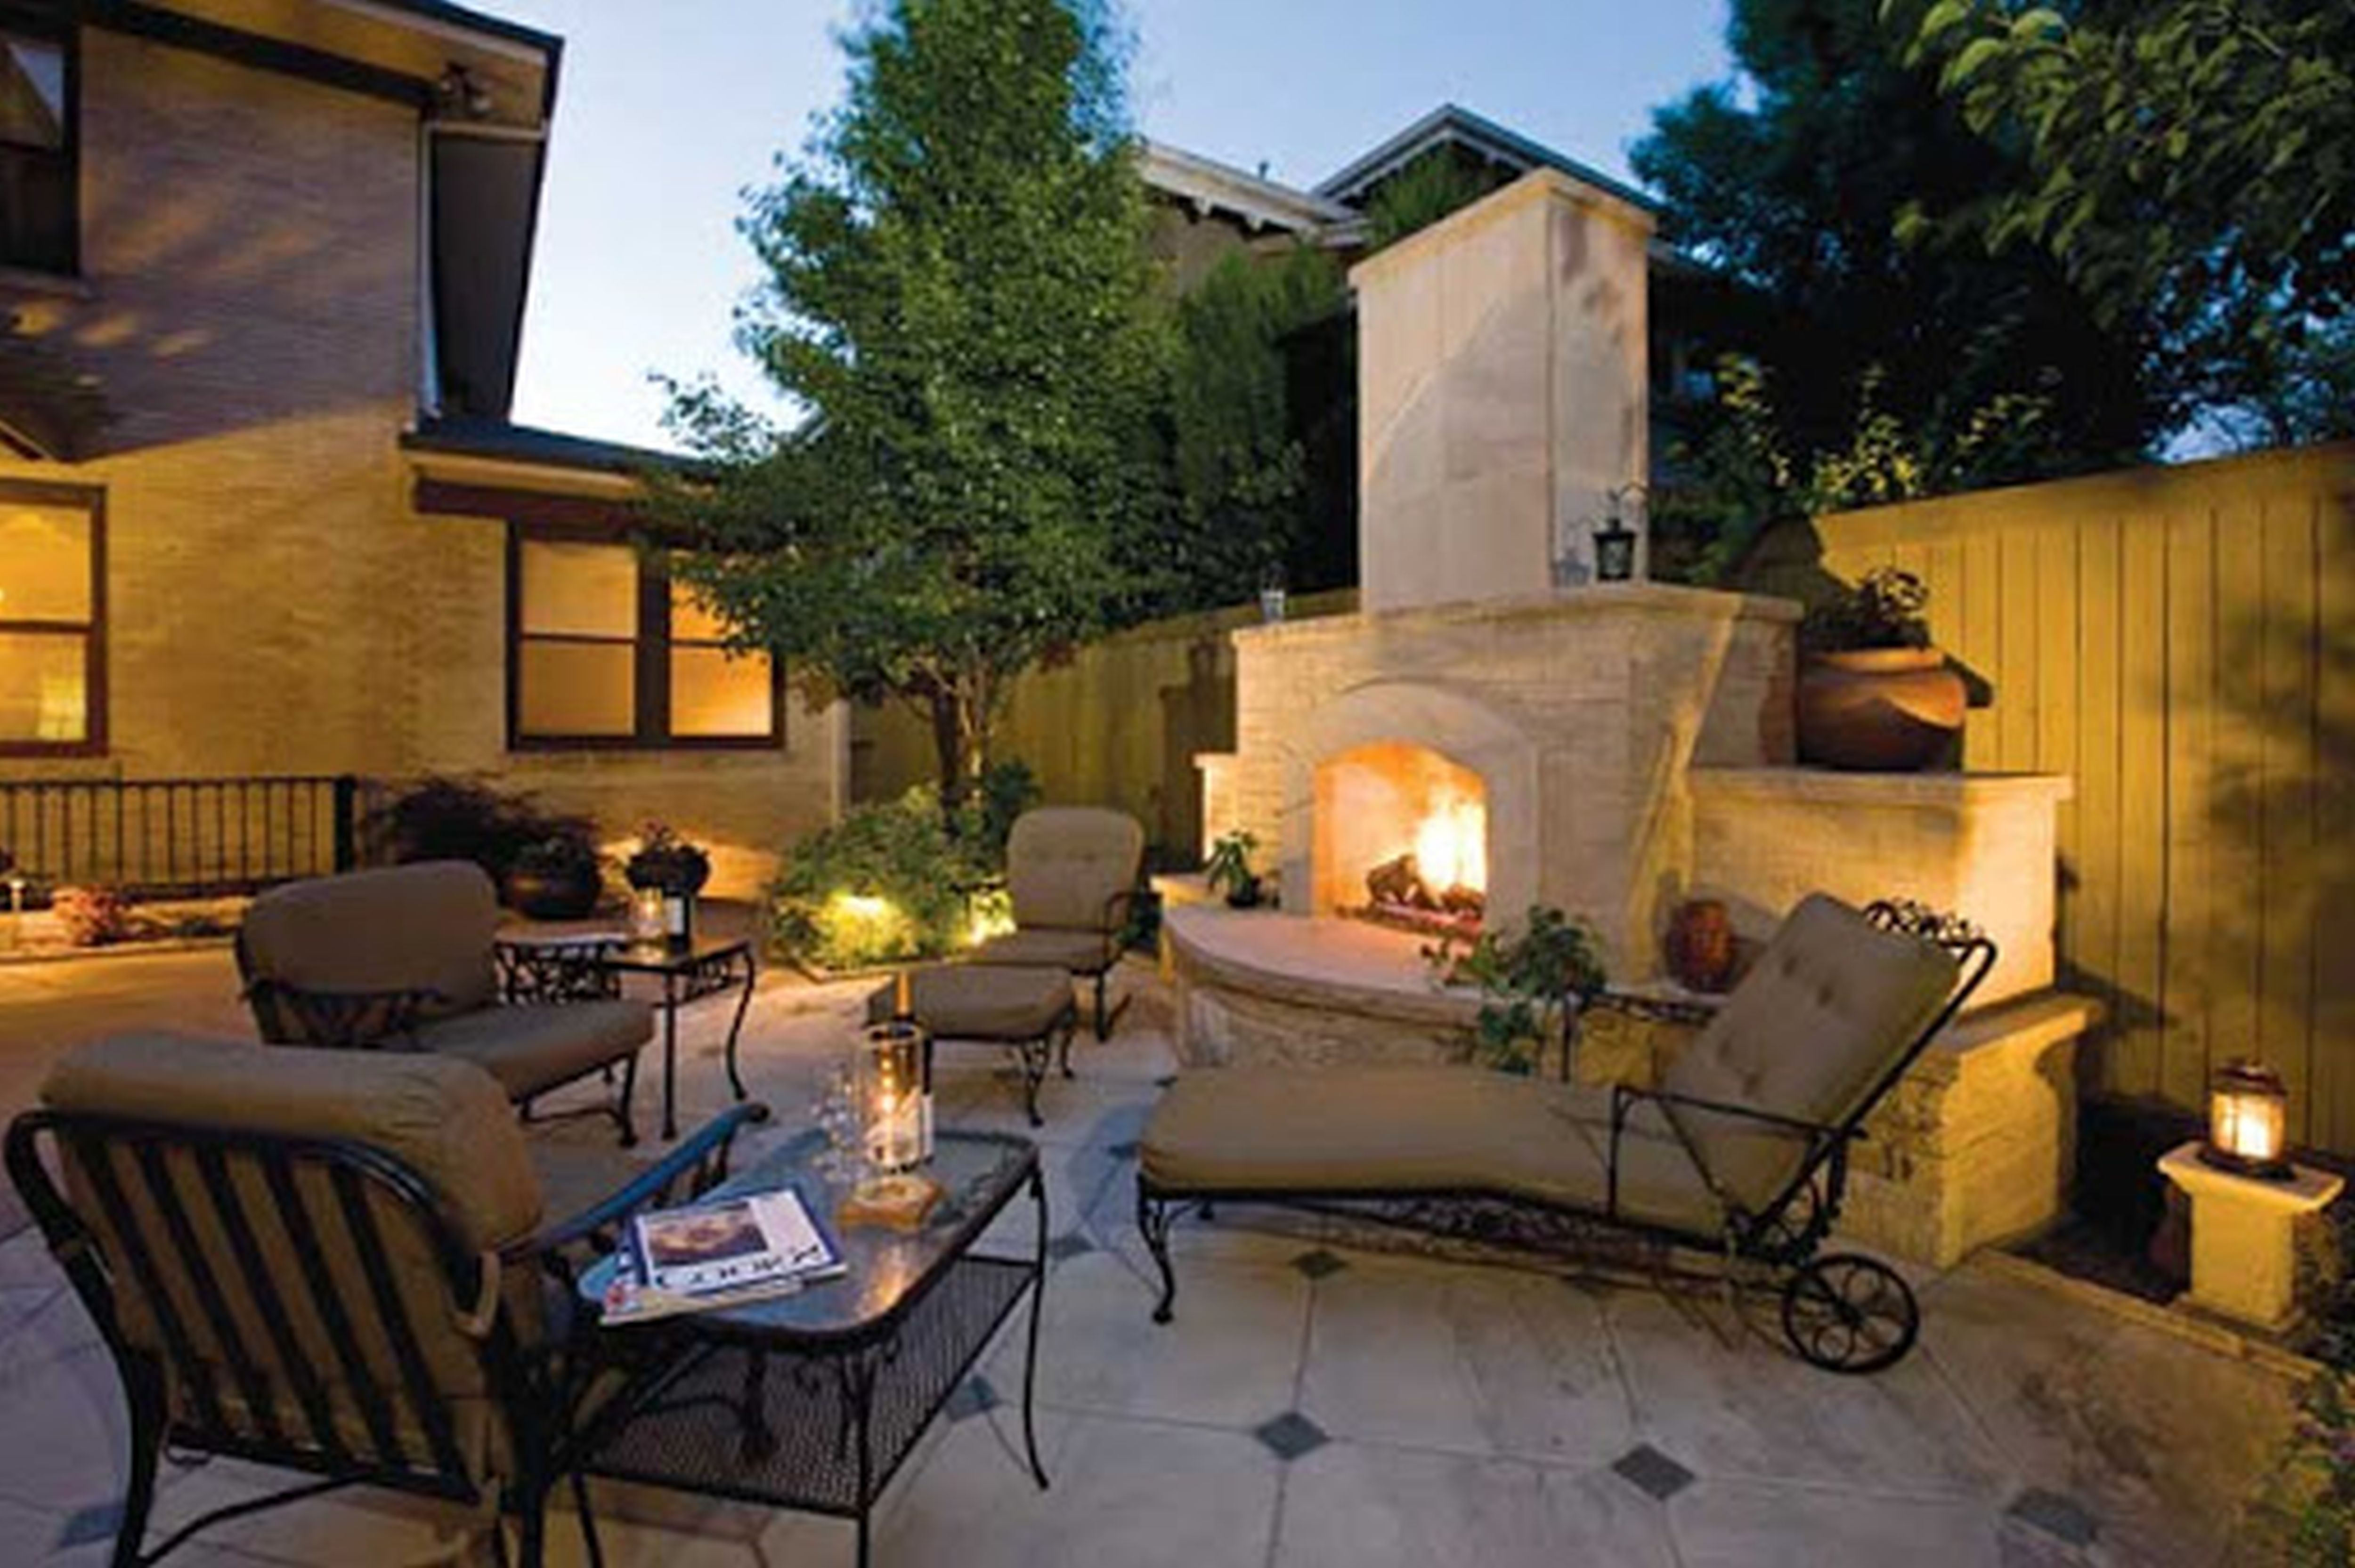 Furniture For A Rustic Outdoor Patio